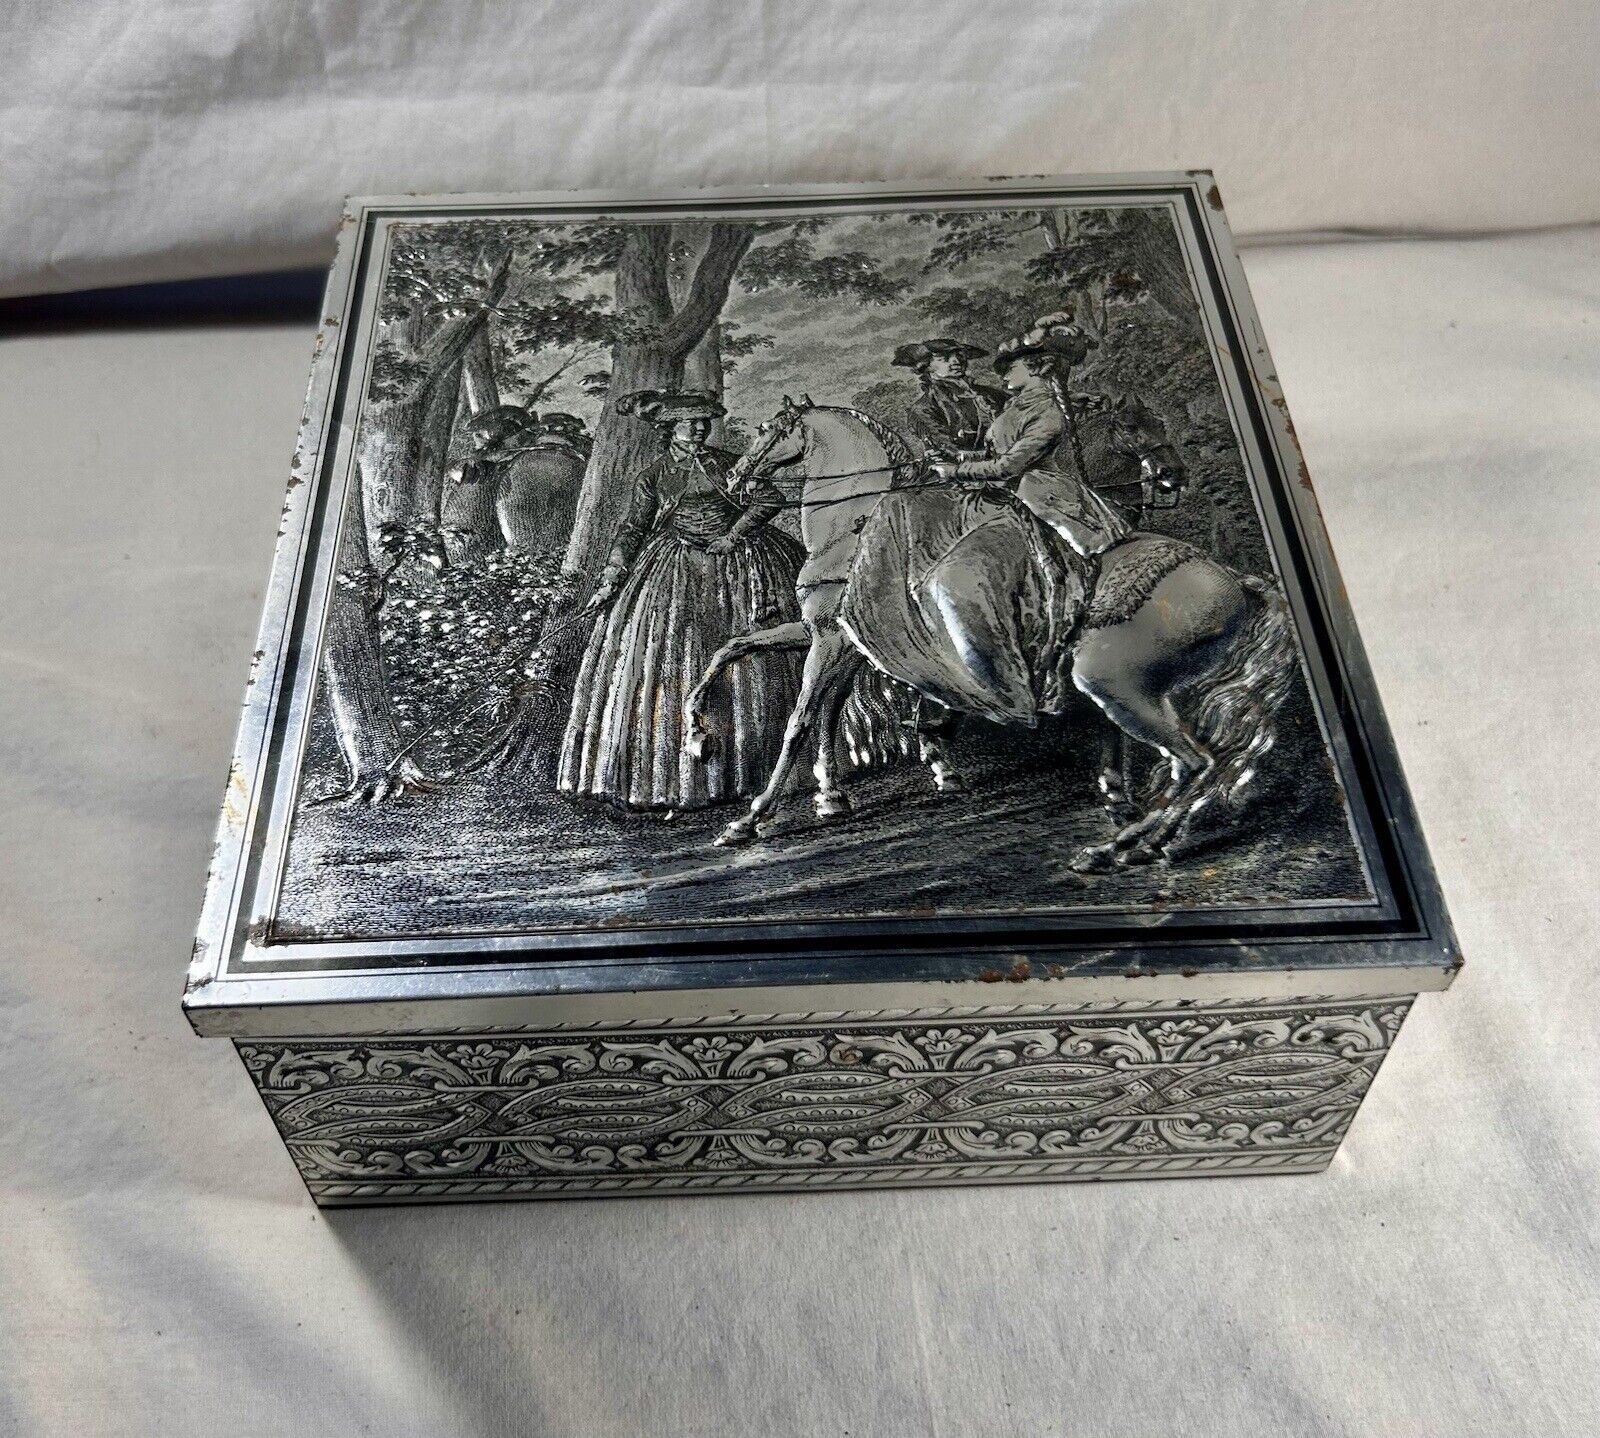 Vintage Biscuit Cookie Tin Box Silver Tone Colonial Woman Horse Riding Courting 